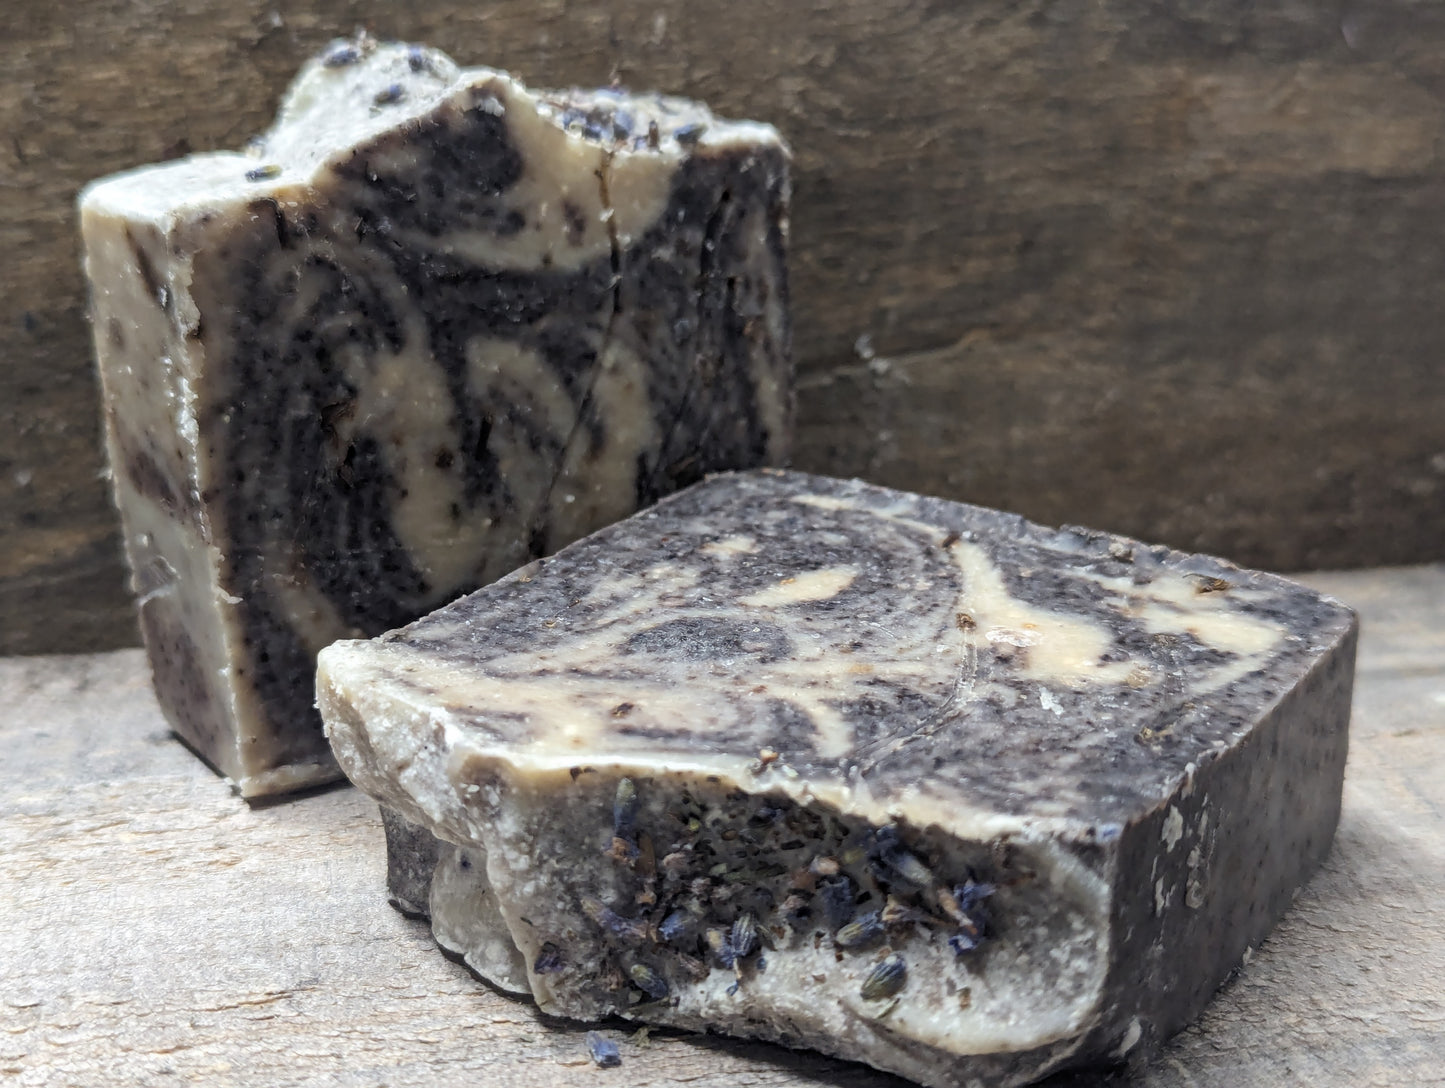 all natural soap, organic soap, real soap, handcrafted soap, homemade soap, natural body care, lavender soap, patchouli soap, lavender patchouli goat milk soap, goat milk soap, the best soap, soap near me, san clemente Island goats, 